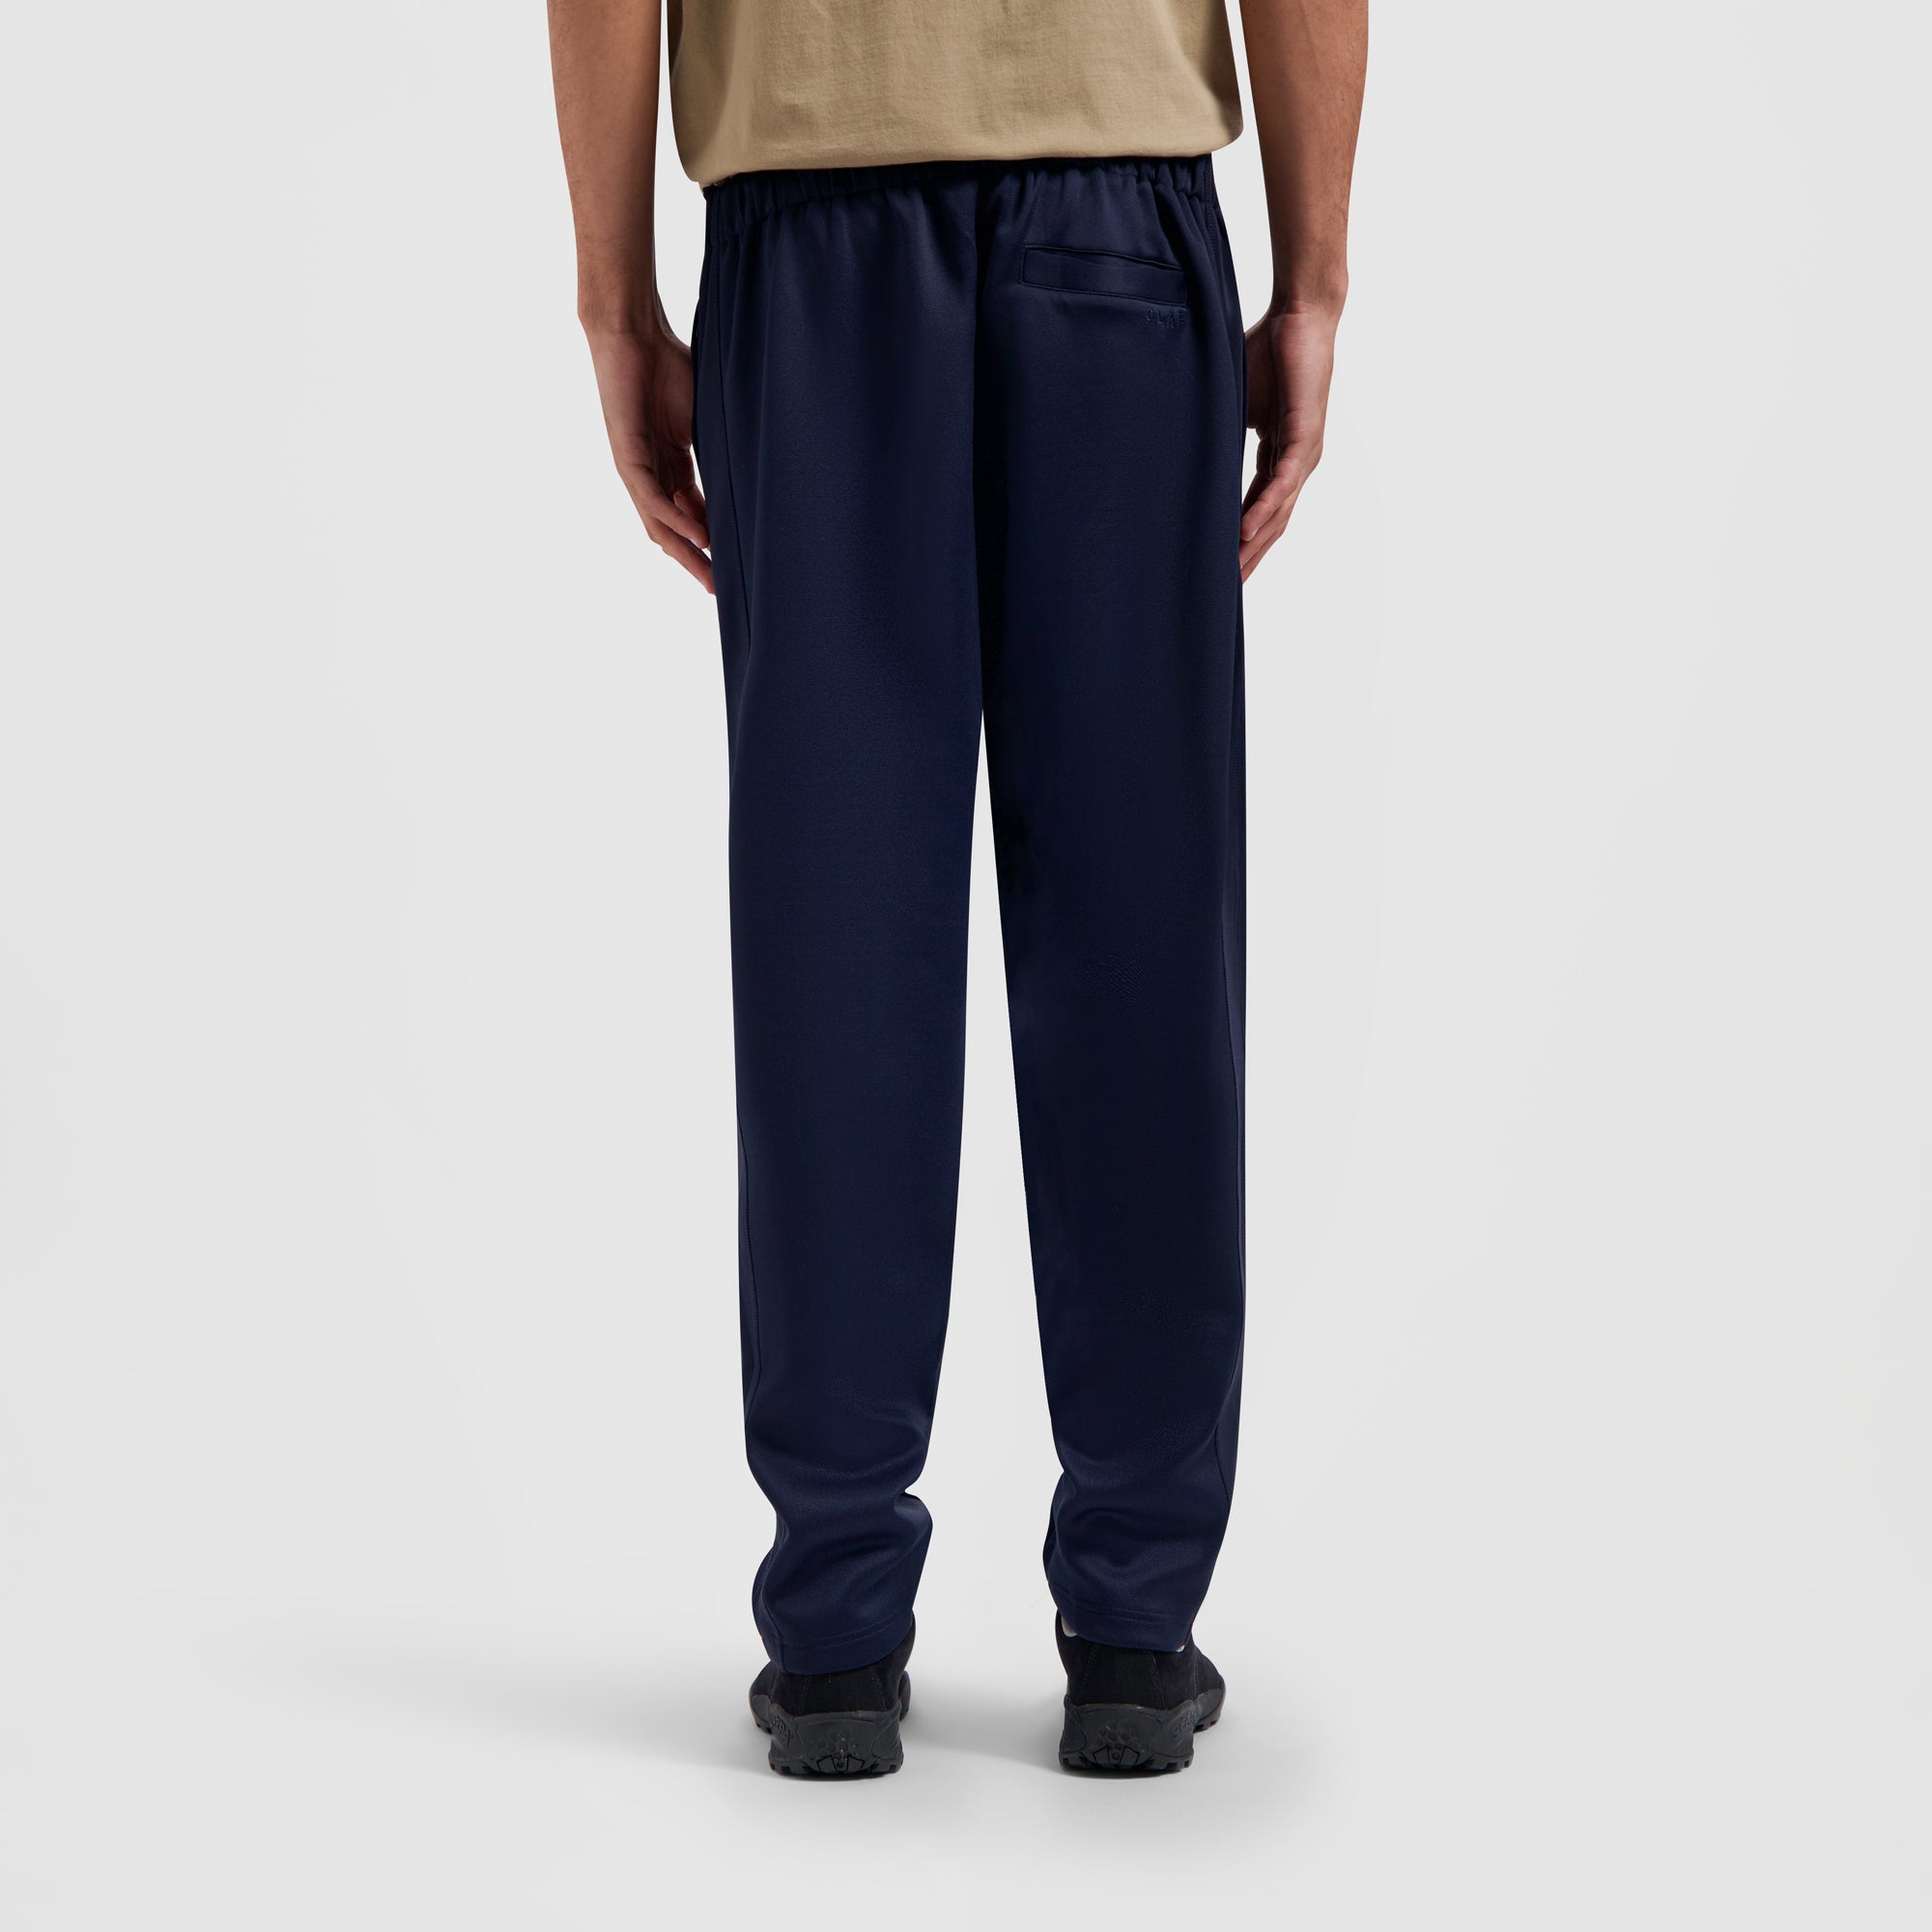 Pique Trousers - Navy